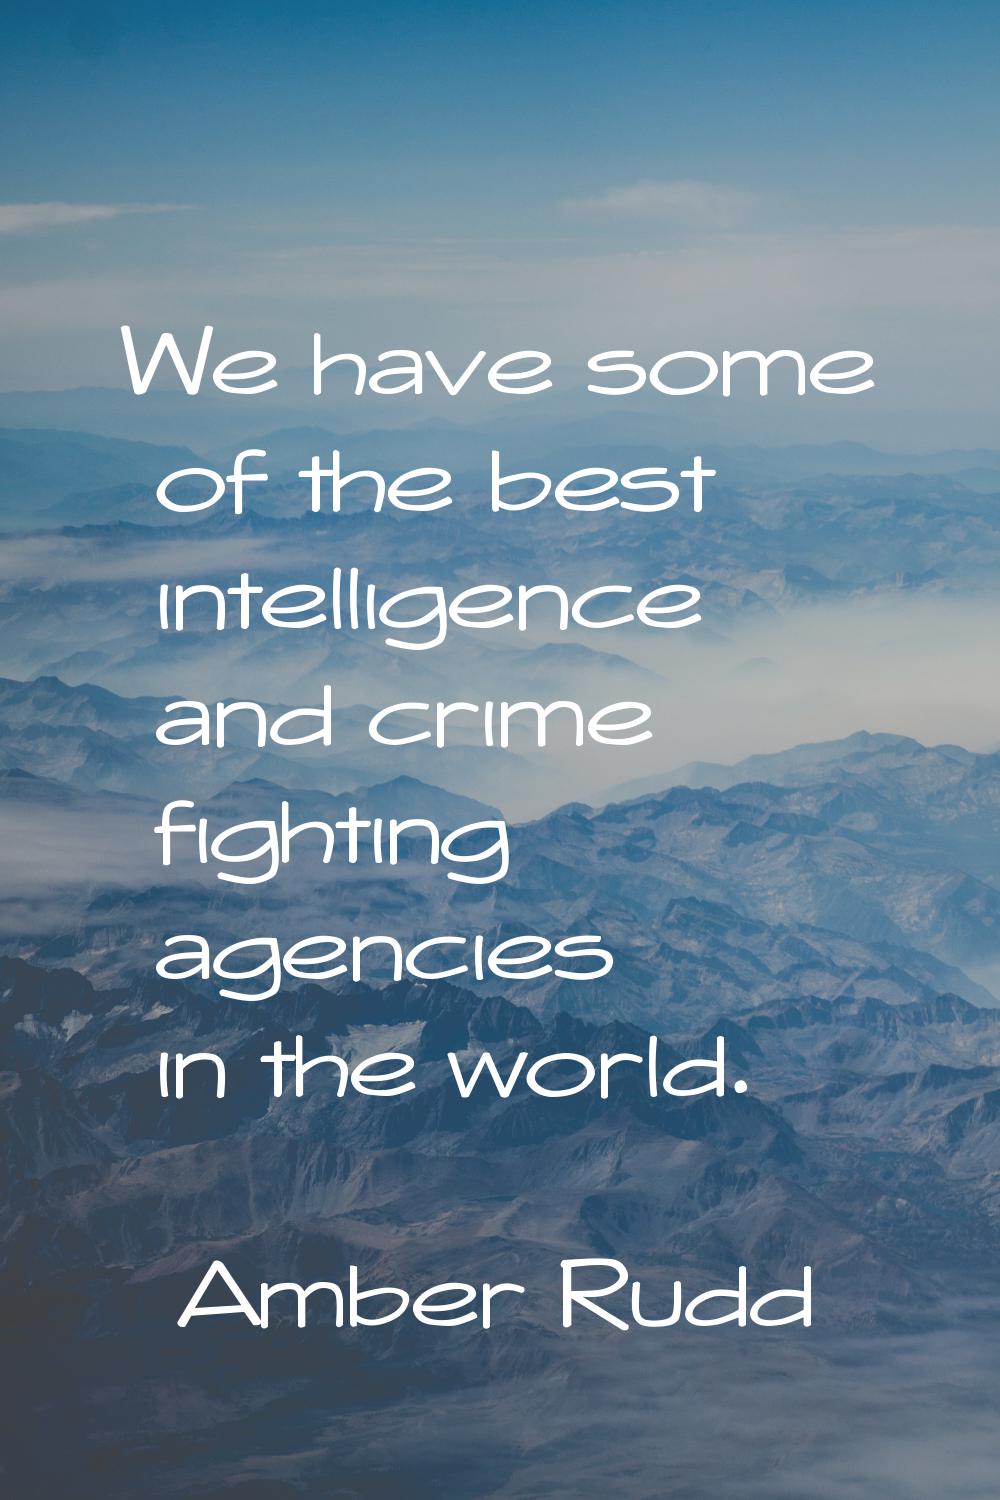 We have some of the best intelligence and crime fighting agencies in the world.